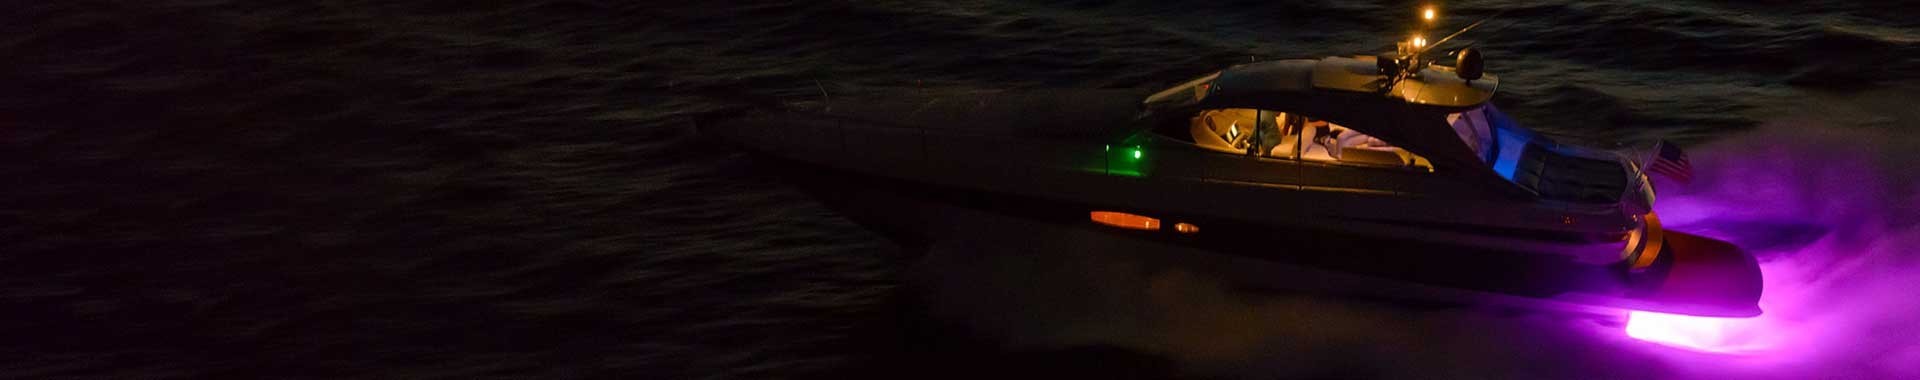 Led underwater for boat | Best Price